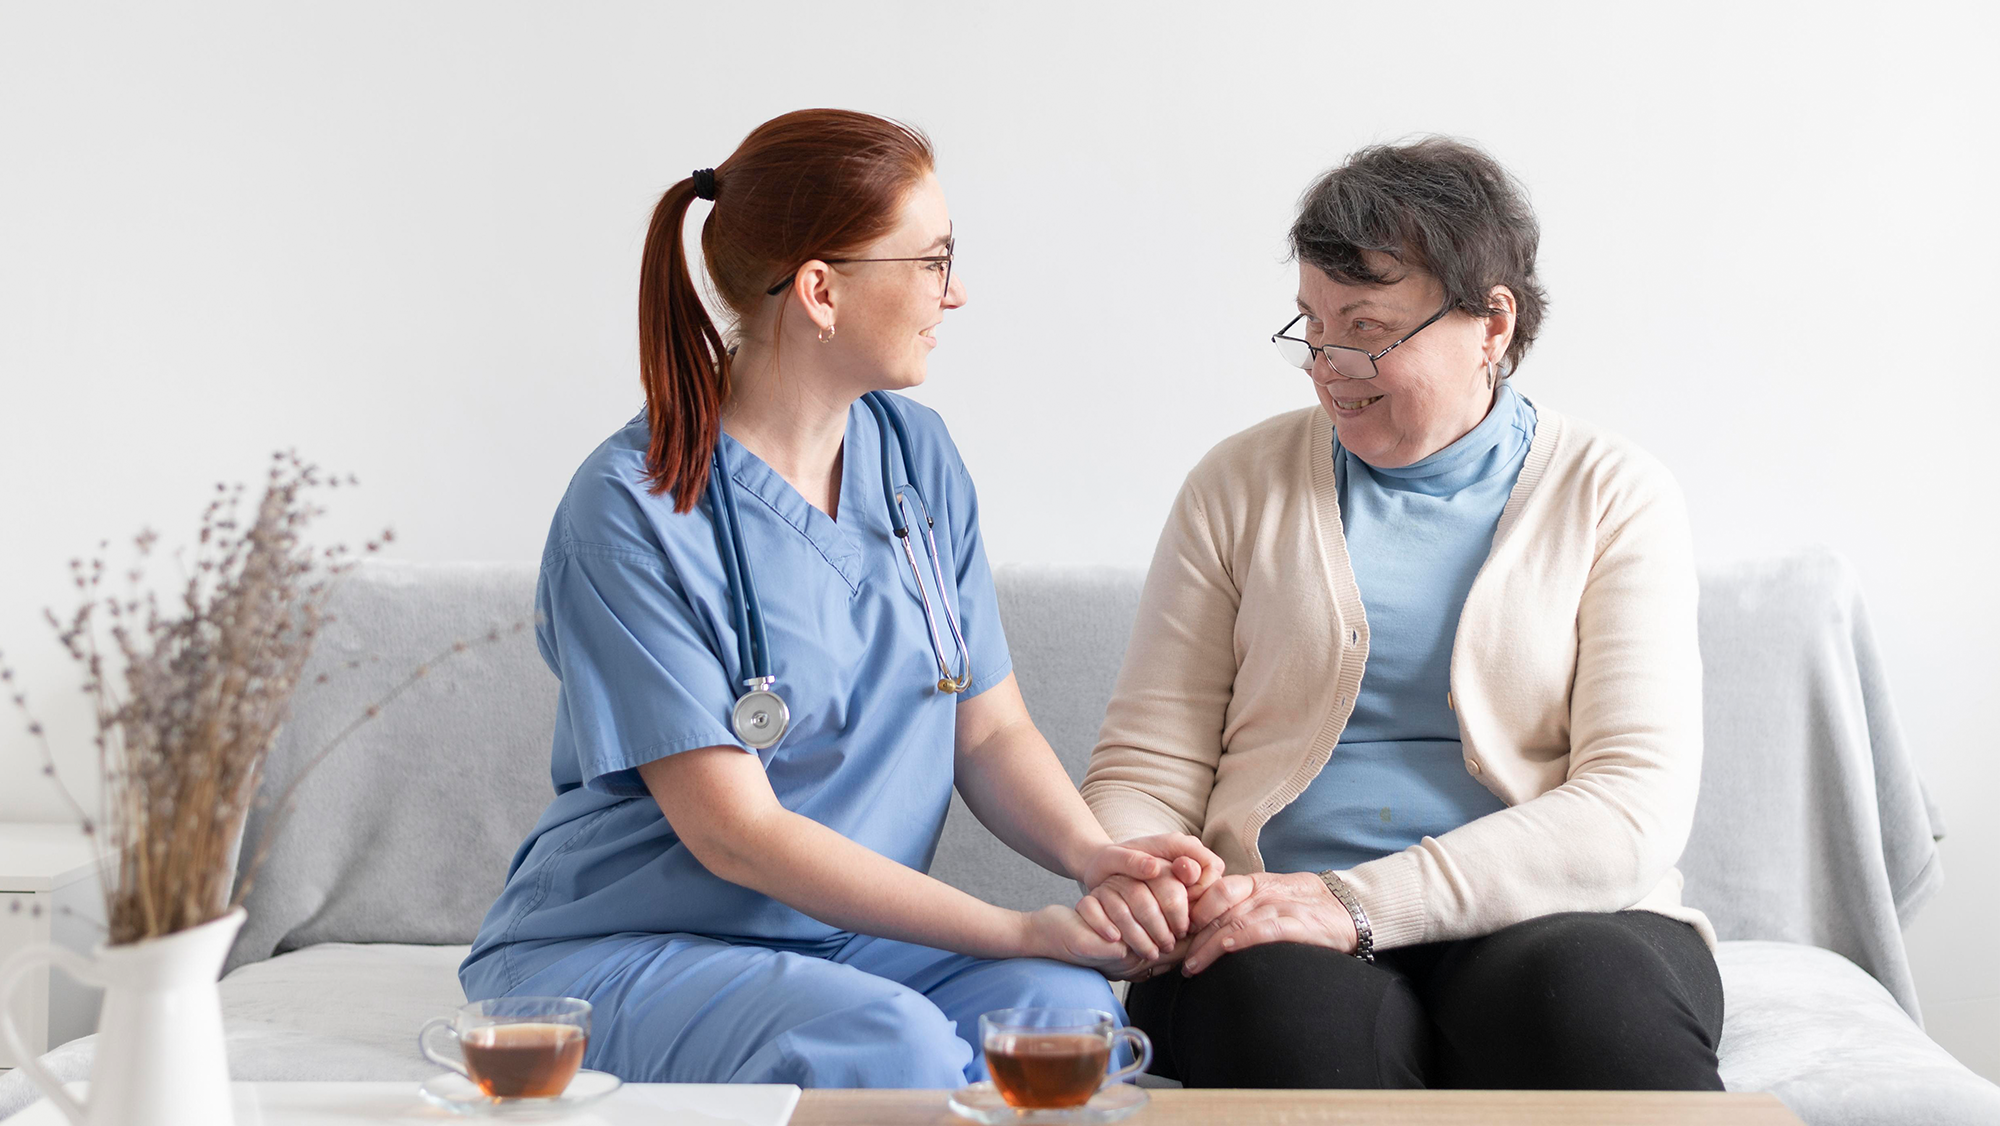 The Role of Nurses in Mental Health Care